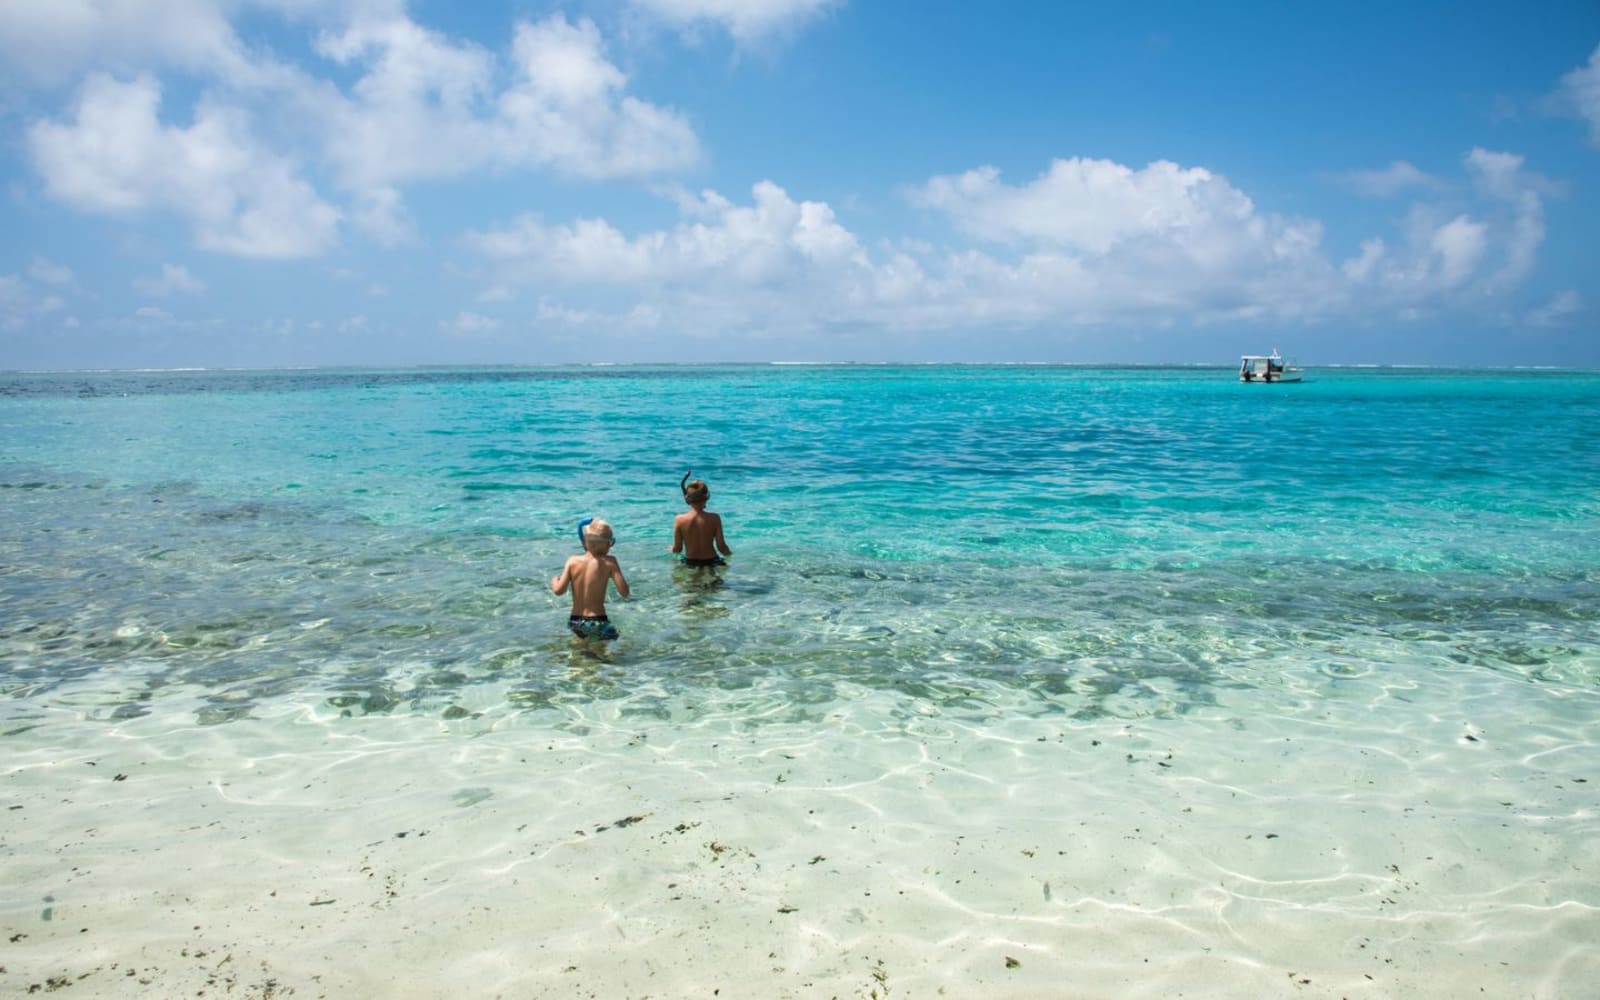 A pair of people wading out in clear blue water to go snorkelling